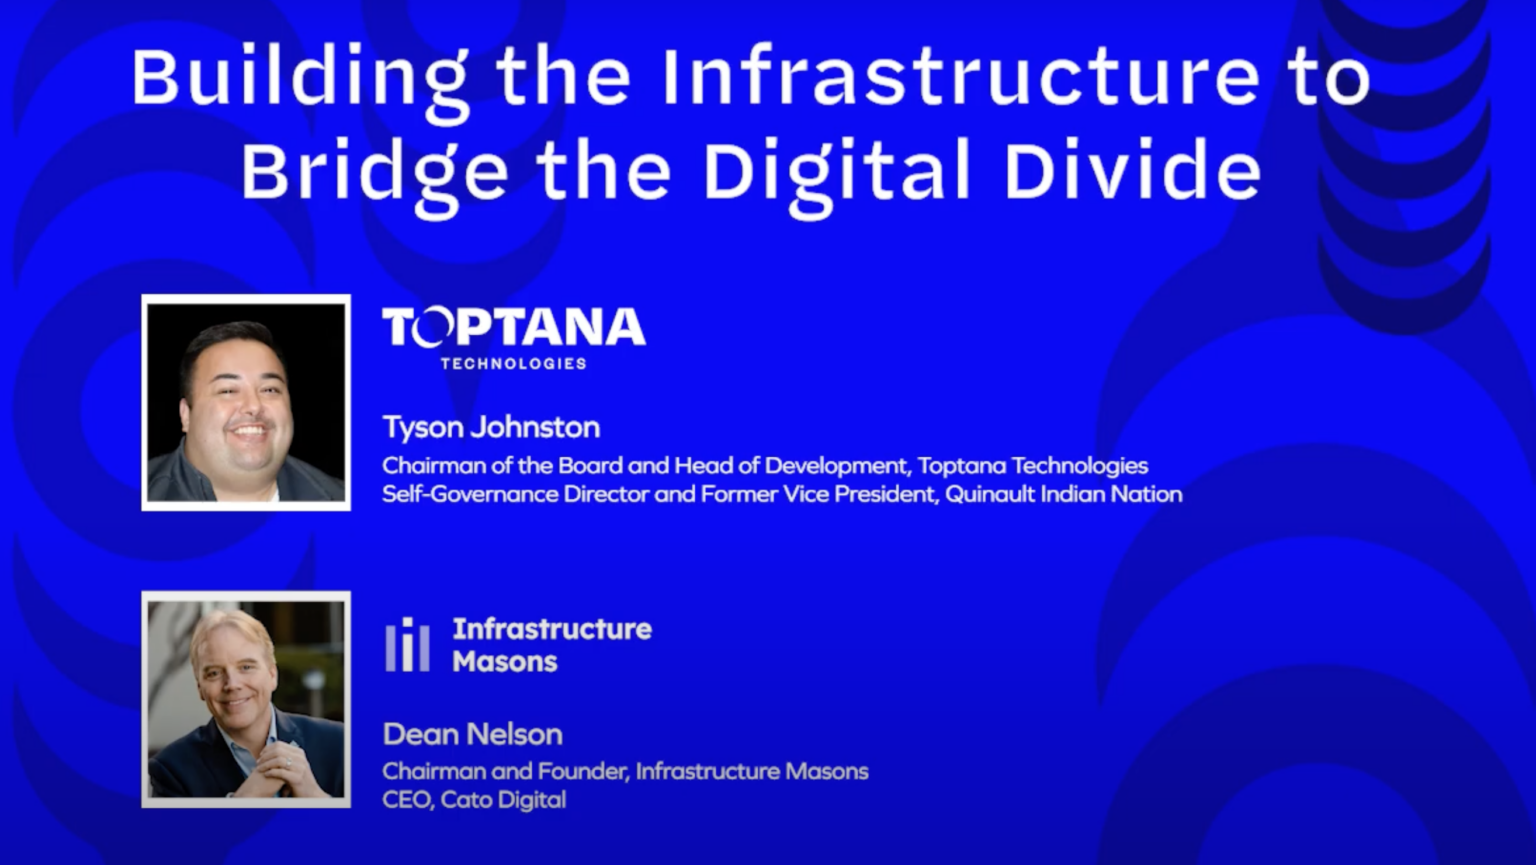 Bridging the Digital Divide: A Fireside Chat with Dean Nelson & Tyson Johnston